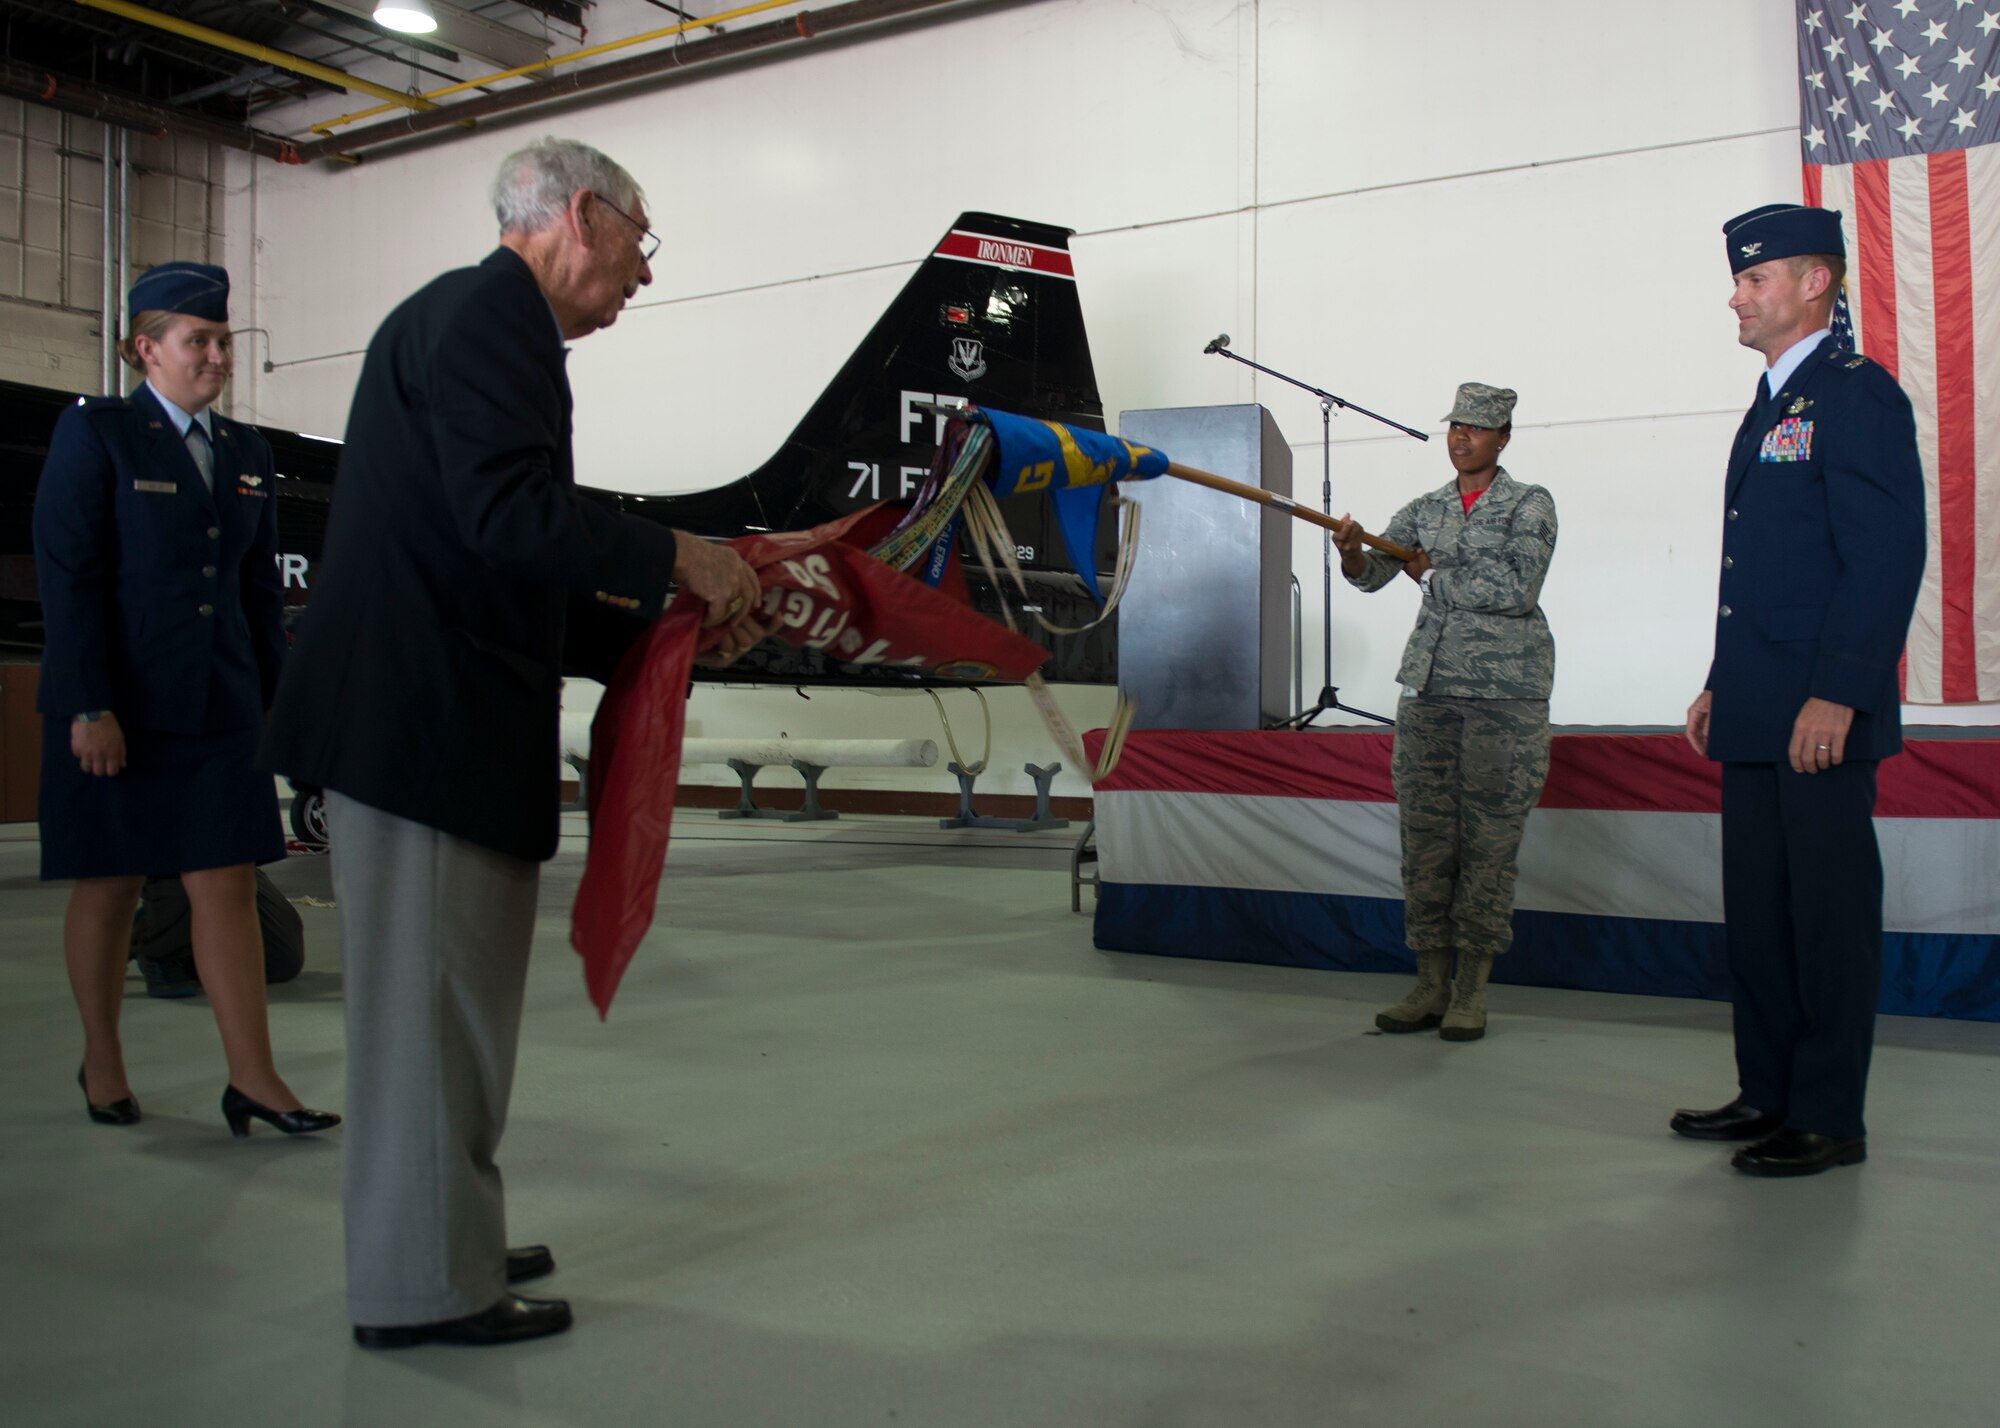 P.E. MacAllister, a former member of the 71st Fighter Squadron, unveils the squadron’s guidon during a reactivation ceremony at Langley Air Force Base, Va., Aug. 21, 2015. Throughout its history, the 71st FS has flown a variety of combat aircraft including the P-38 Lightning, P-80 Shooting Star, F-86 Sabre, F-106 Delta Dart, and F-4 Phantom.  In 1975, the 71st Tactical Fighter Squadron moved to Langley and was equipped with the F-15 Eagle, which it flew for more than 30 years before its deactivation in 2010. (U.S. Air Force photo by Staff Sgt. John D. Strong II/Released)